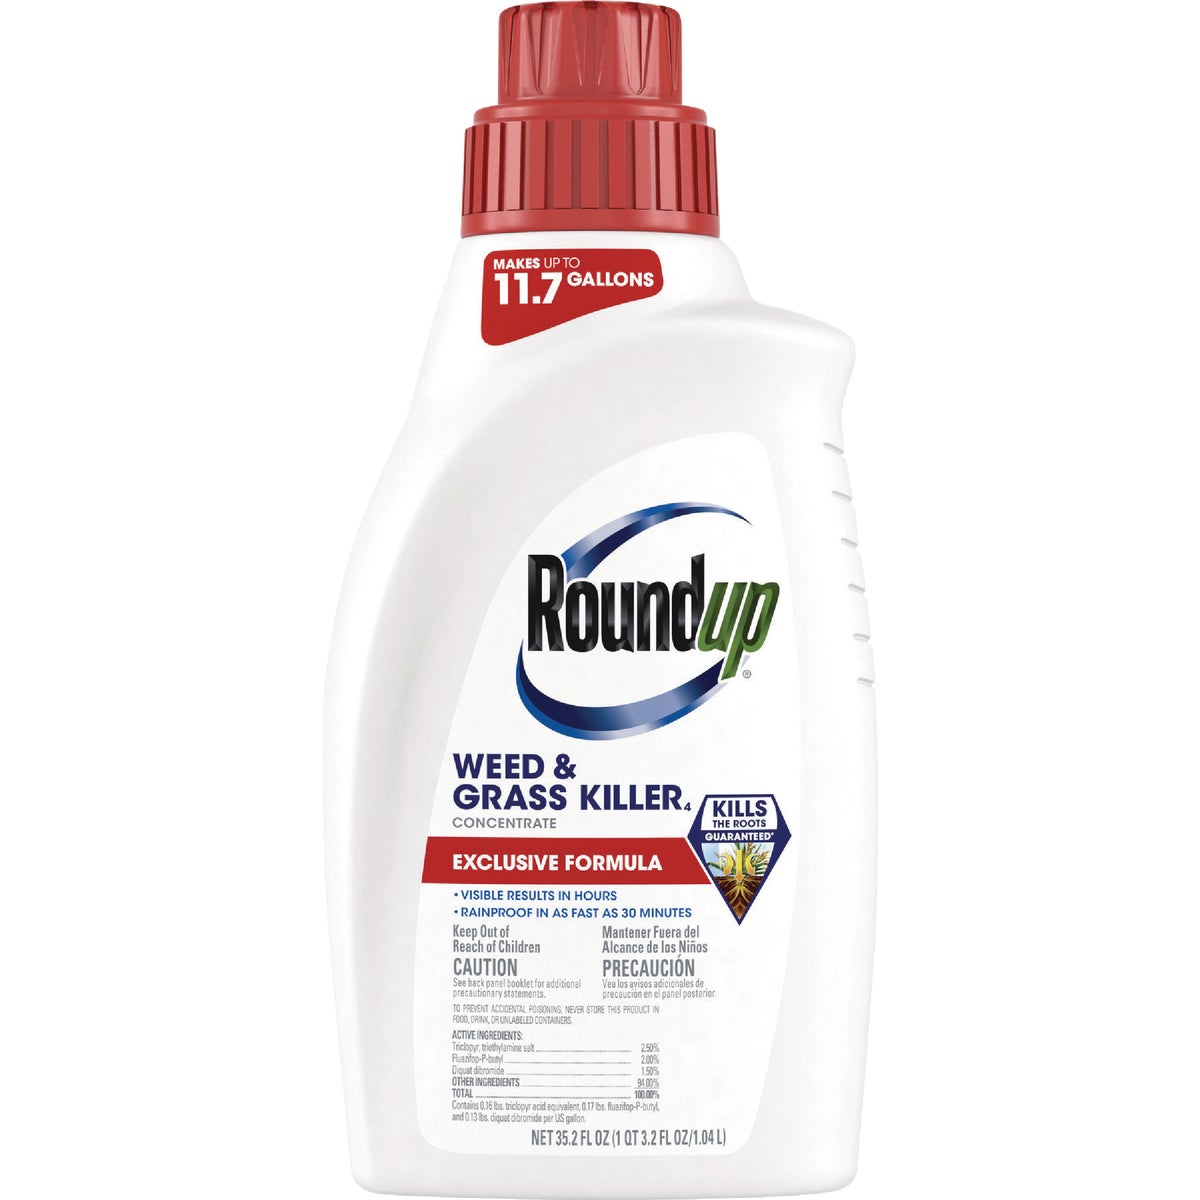 Roundup Exclusive Formula 35.2 Oz. Concentrate Weed & Grass Killer